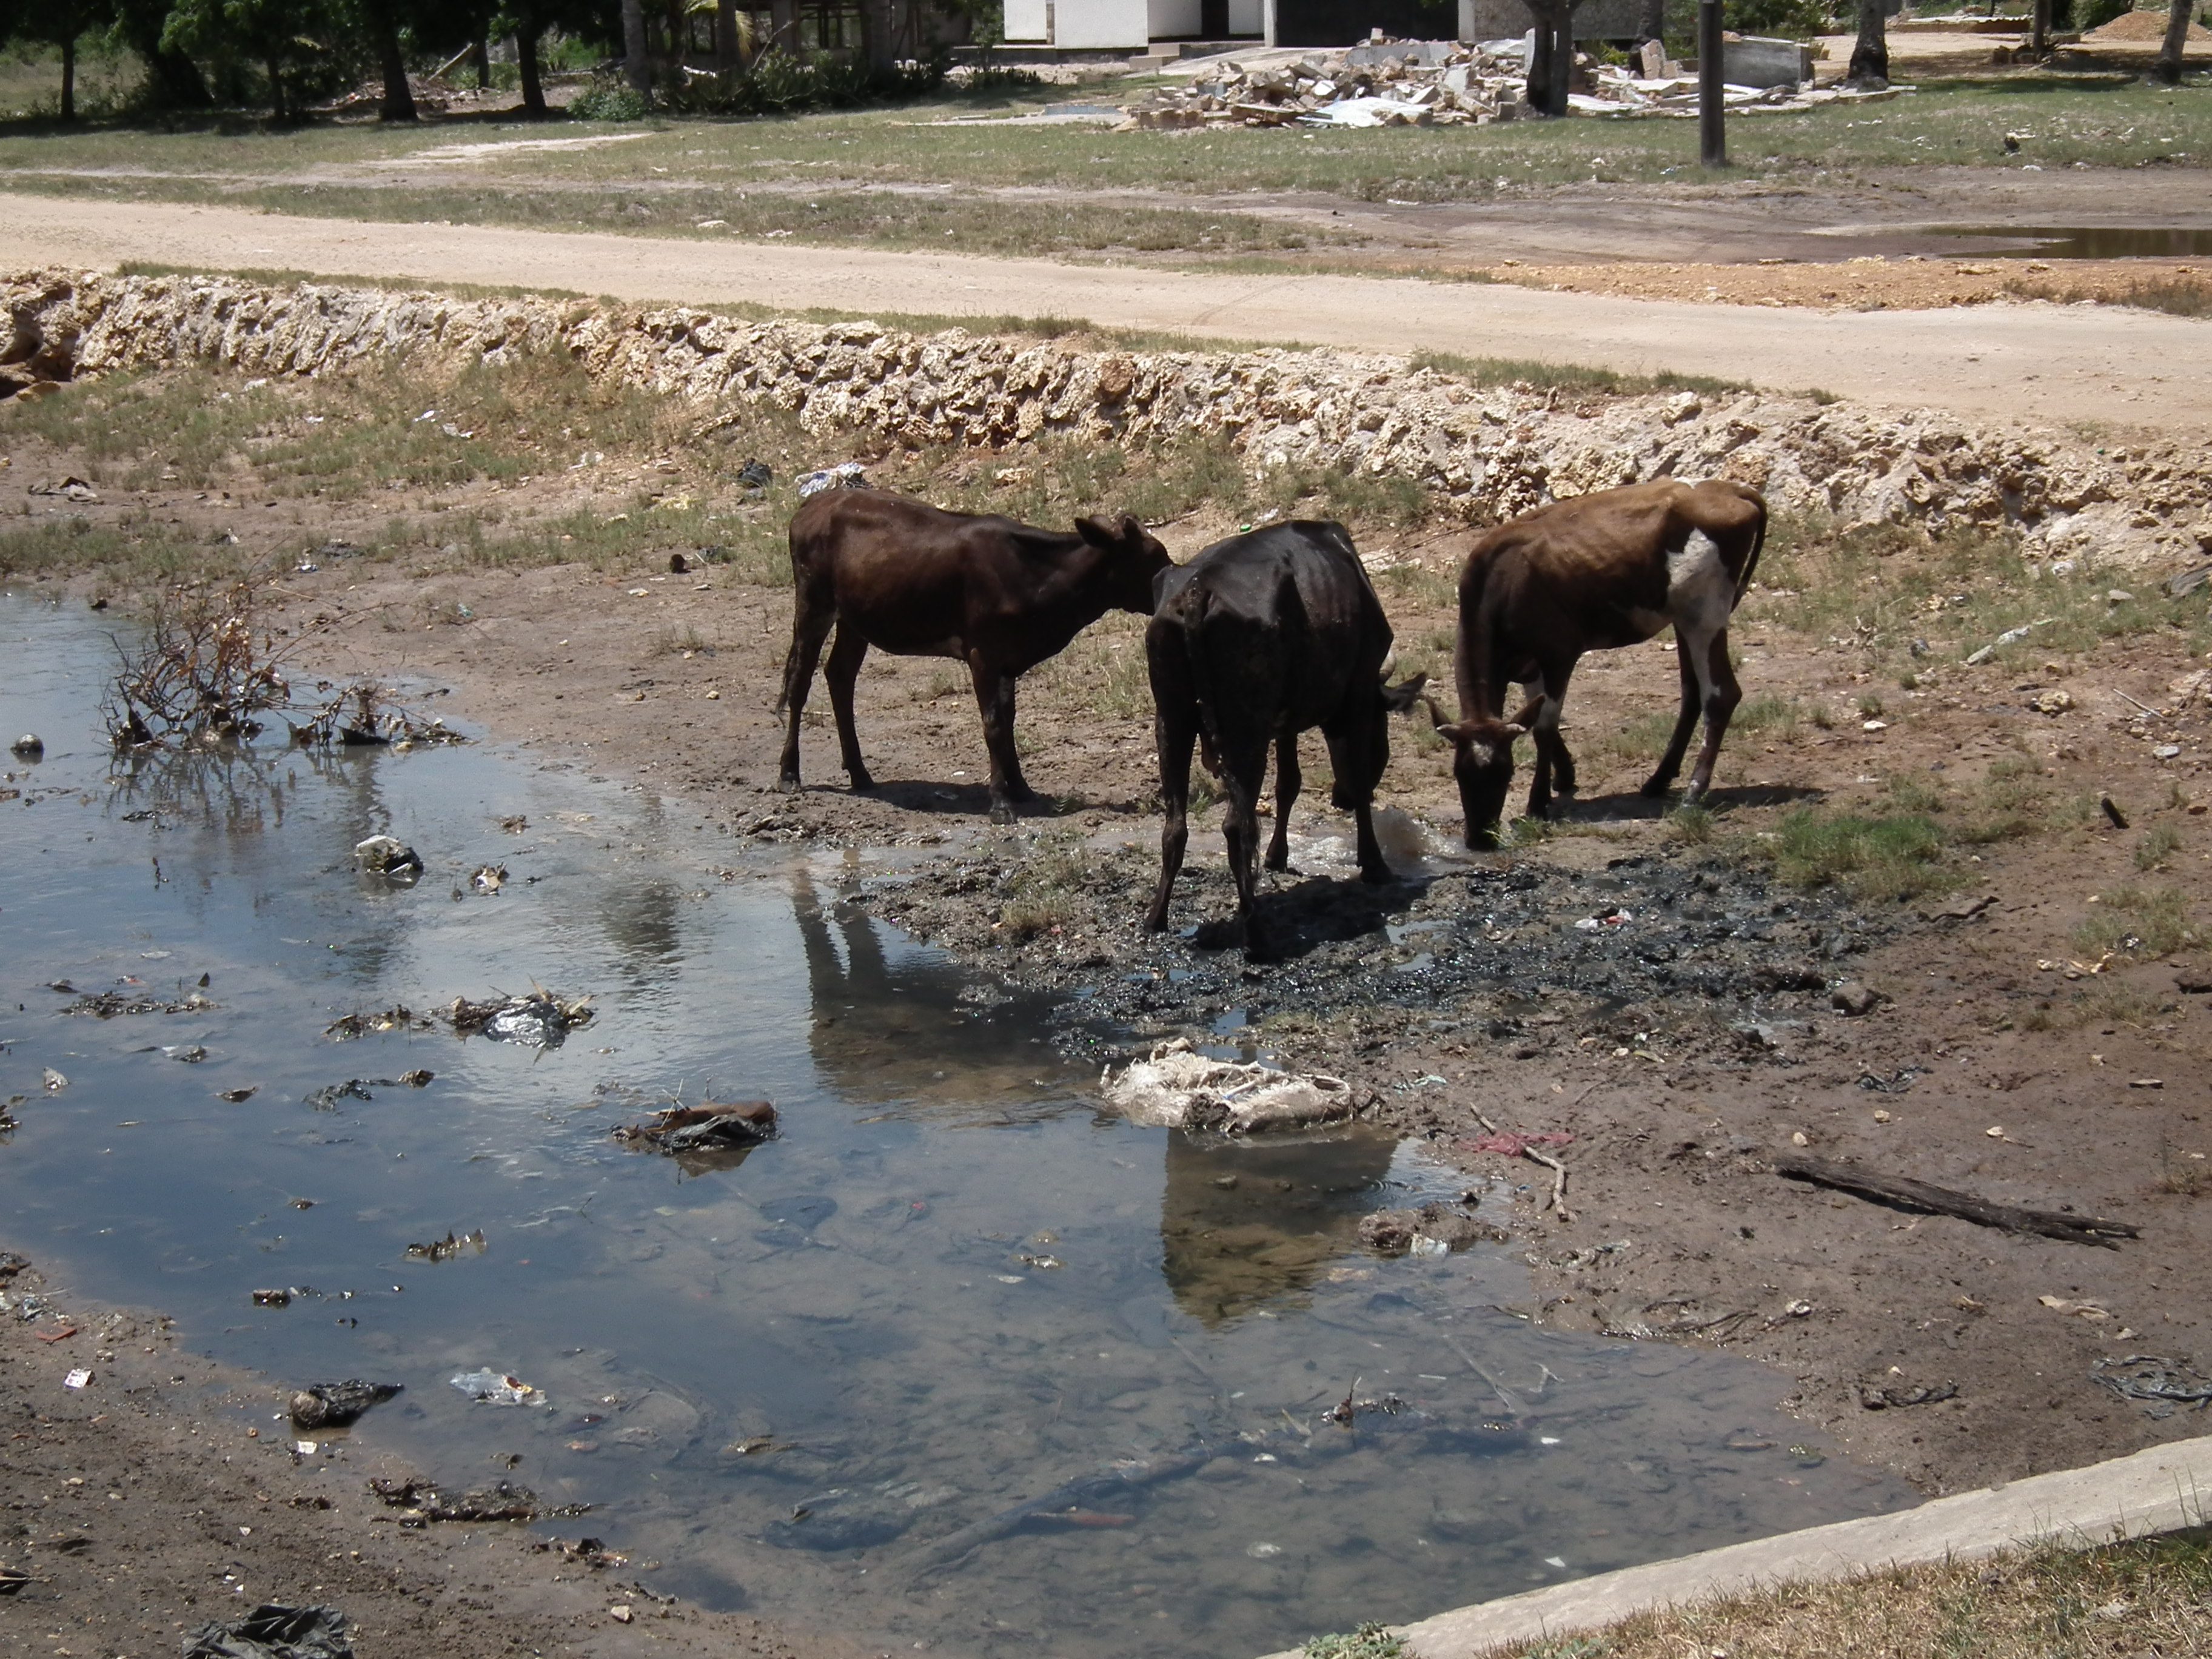 Cattle drink from a polluted water source